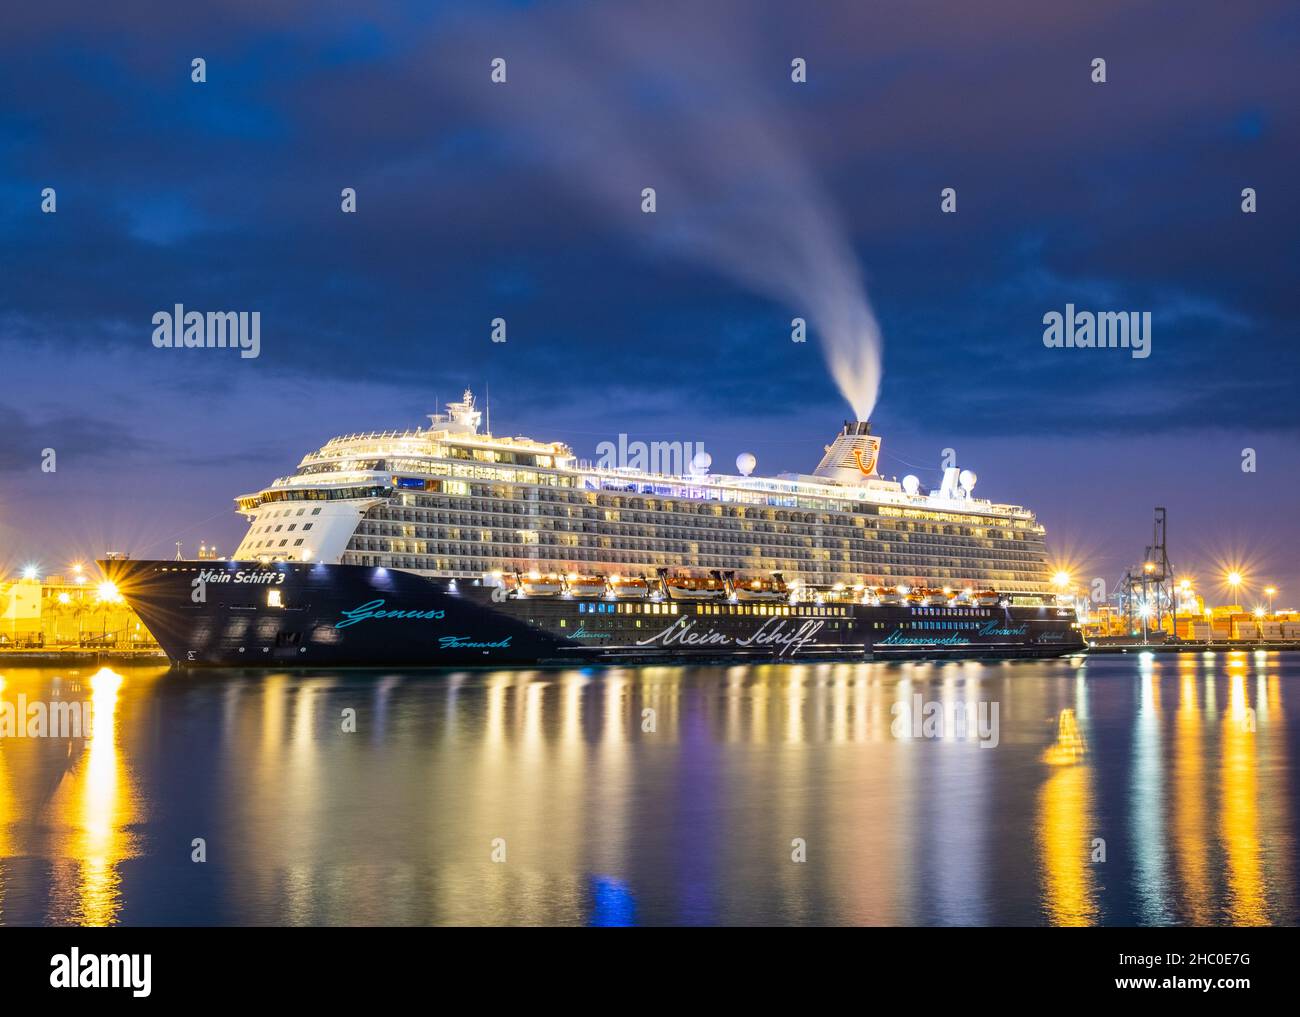 Gran Canaria, Canary Islands, Spain. 22nd December, 2021. TUI cruise ship, Mein Schiff 3 in Las Palmas port on Gran Canaria. With daily record Covid cases being reported in The Canary Islands (2,600), and 60,000 new cases in total in the whole of Spain in the previous 24hrs, it is being reported that face masks outdoors will be obligatory from Friday. Credit: Alan Dawson/Alamy Live News. Stock Photo